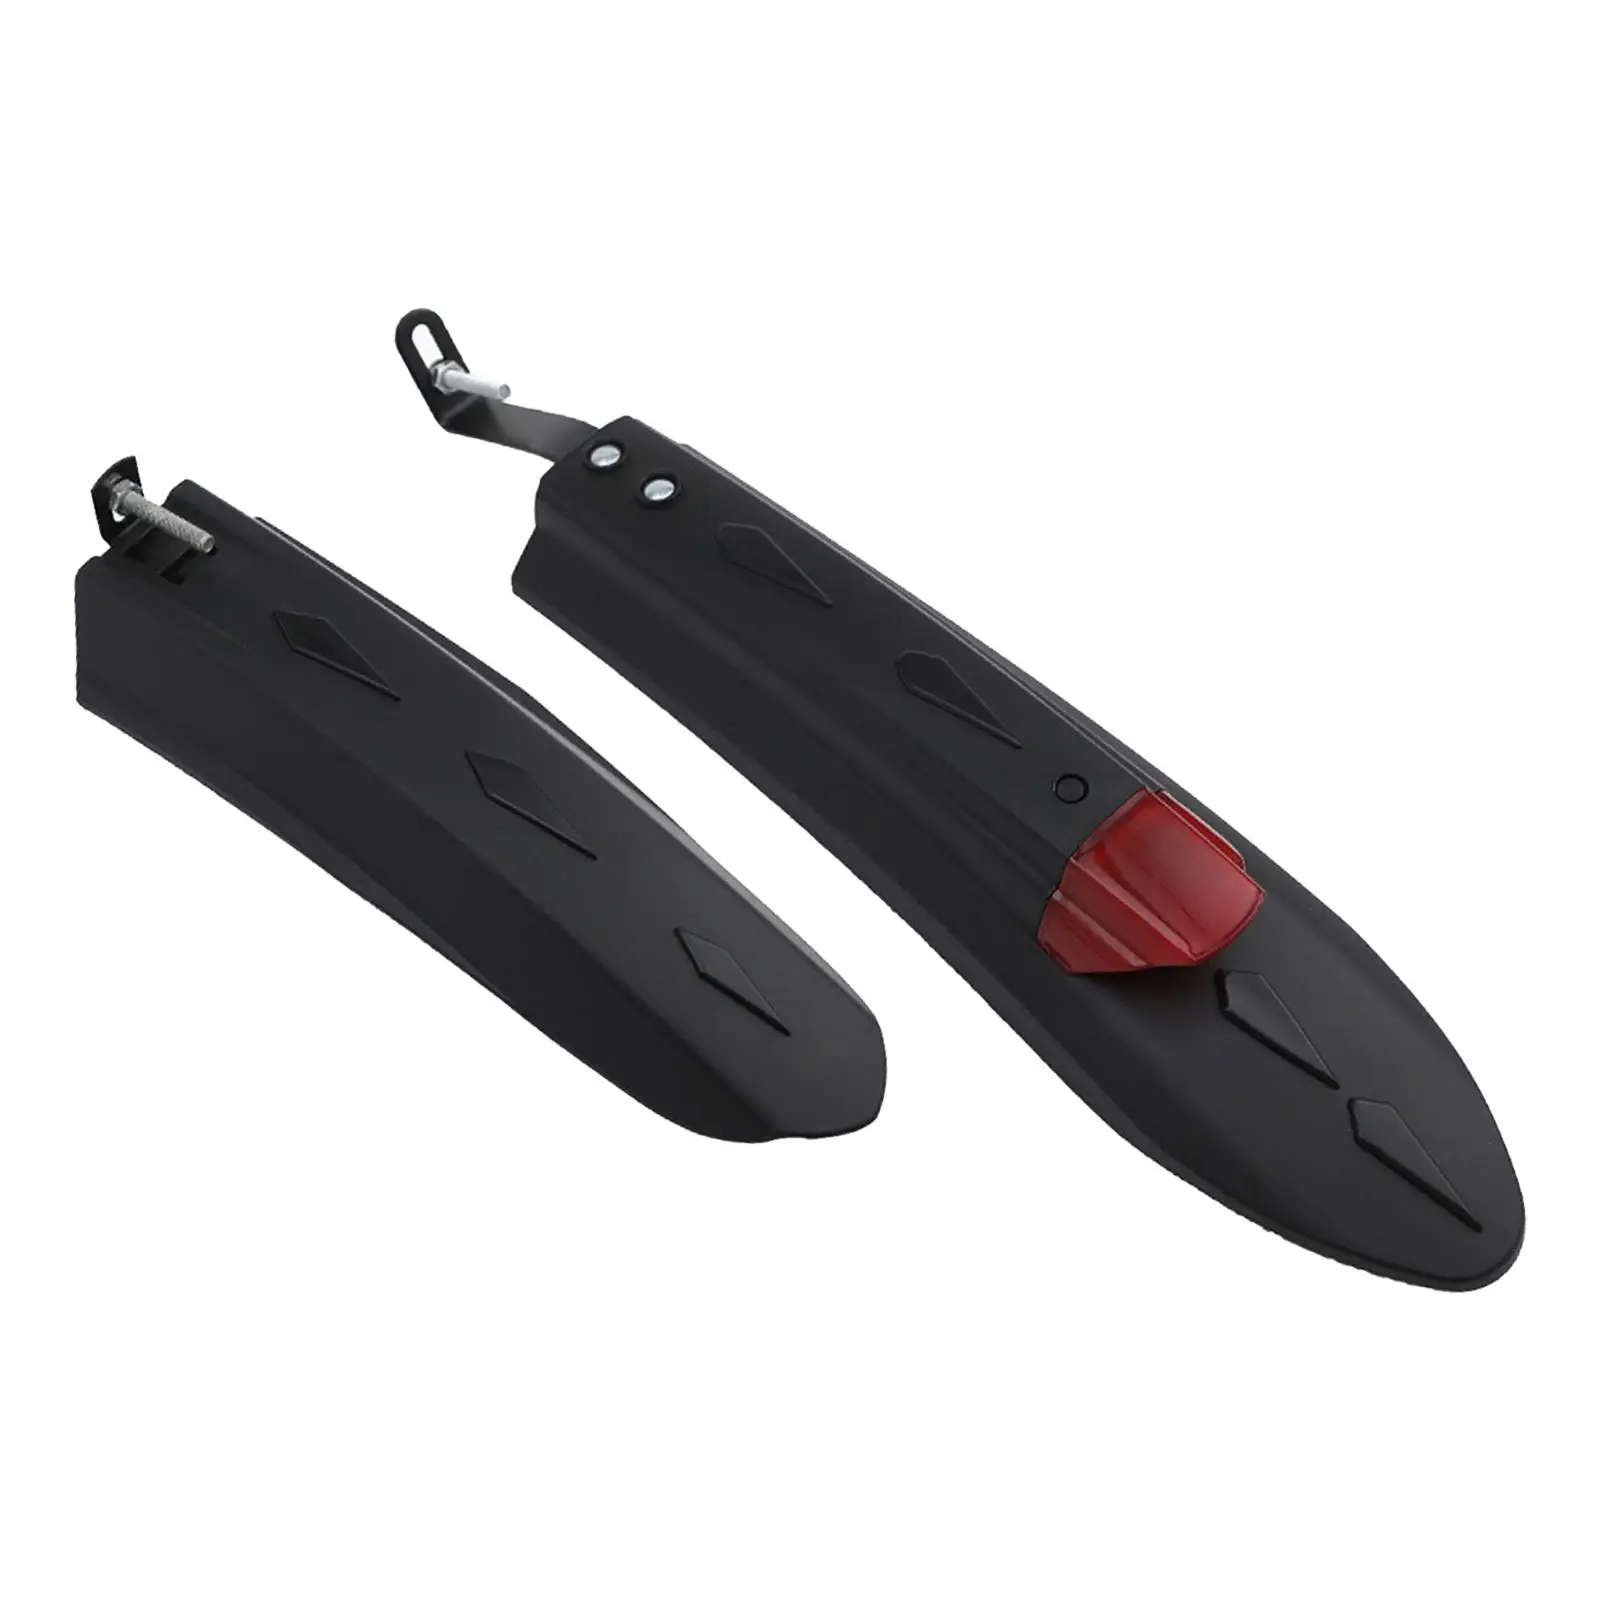 Bike Mudguard Front Rear Set Glow Wheel Protector Portable Bike Front & Rear Fenders for Riding Outdoor Sports Cycling Equipment